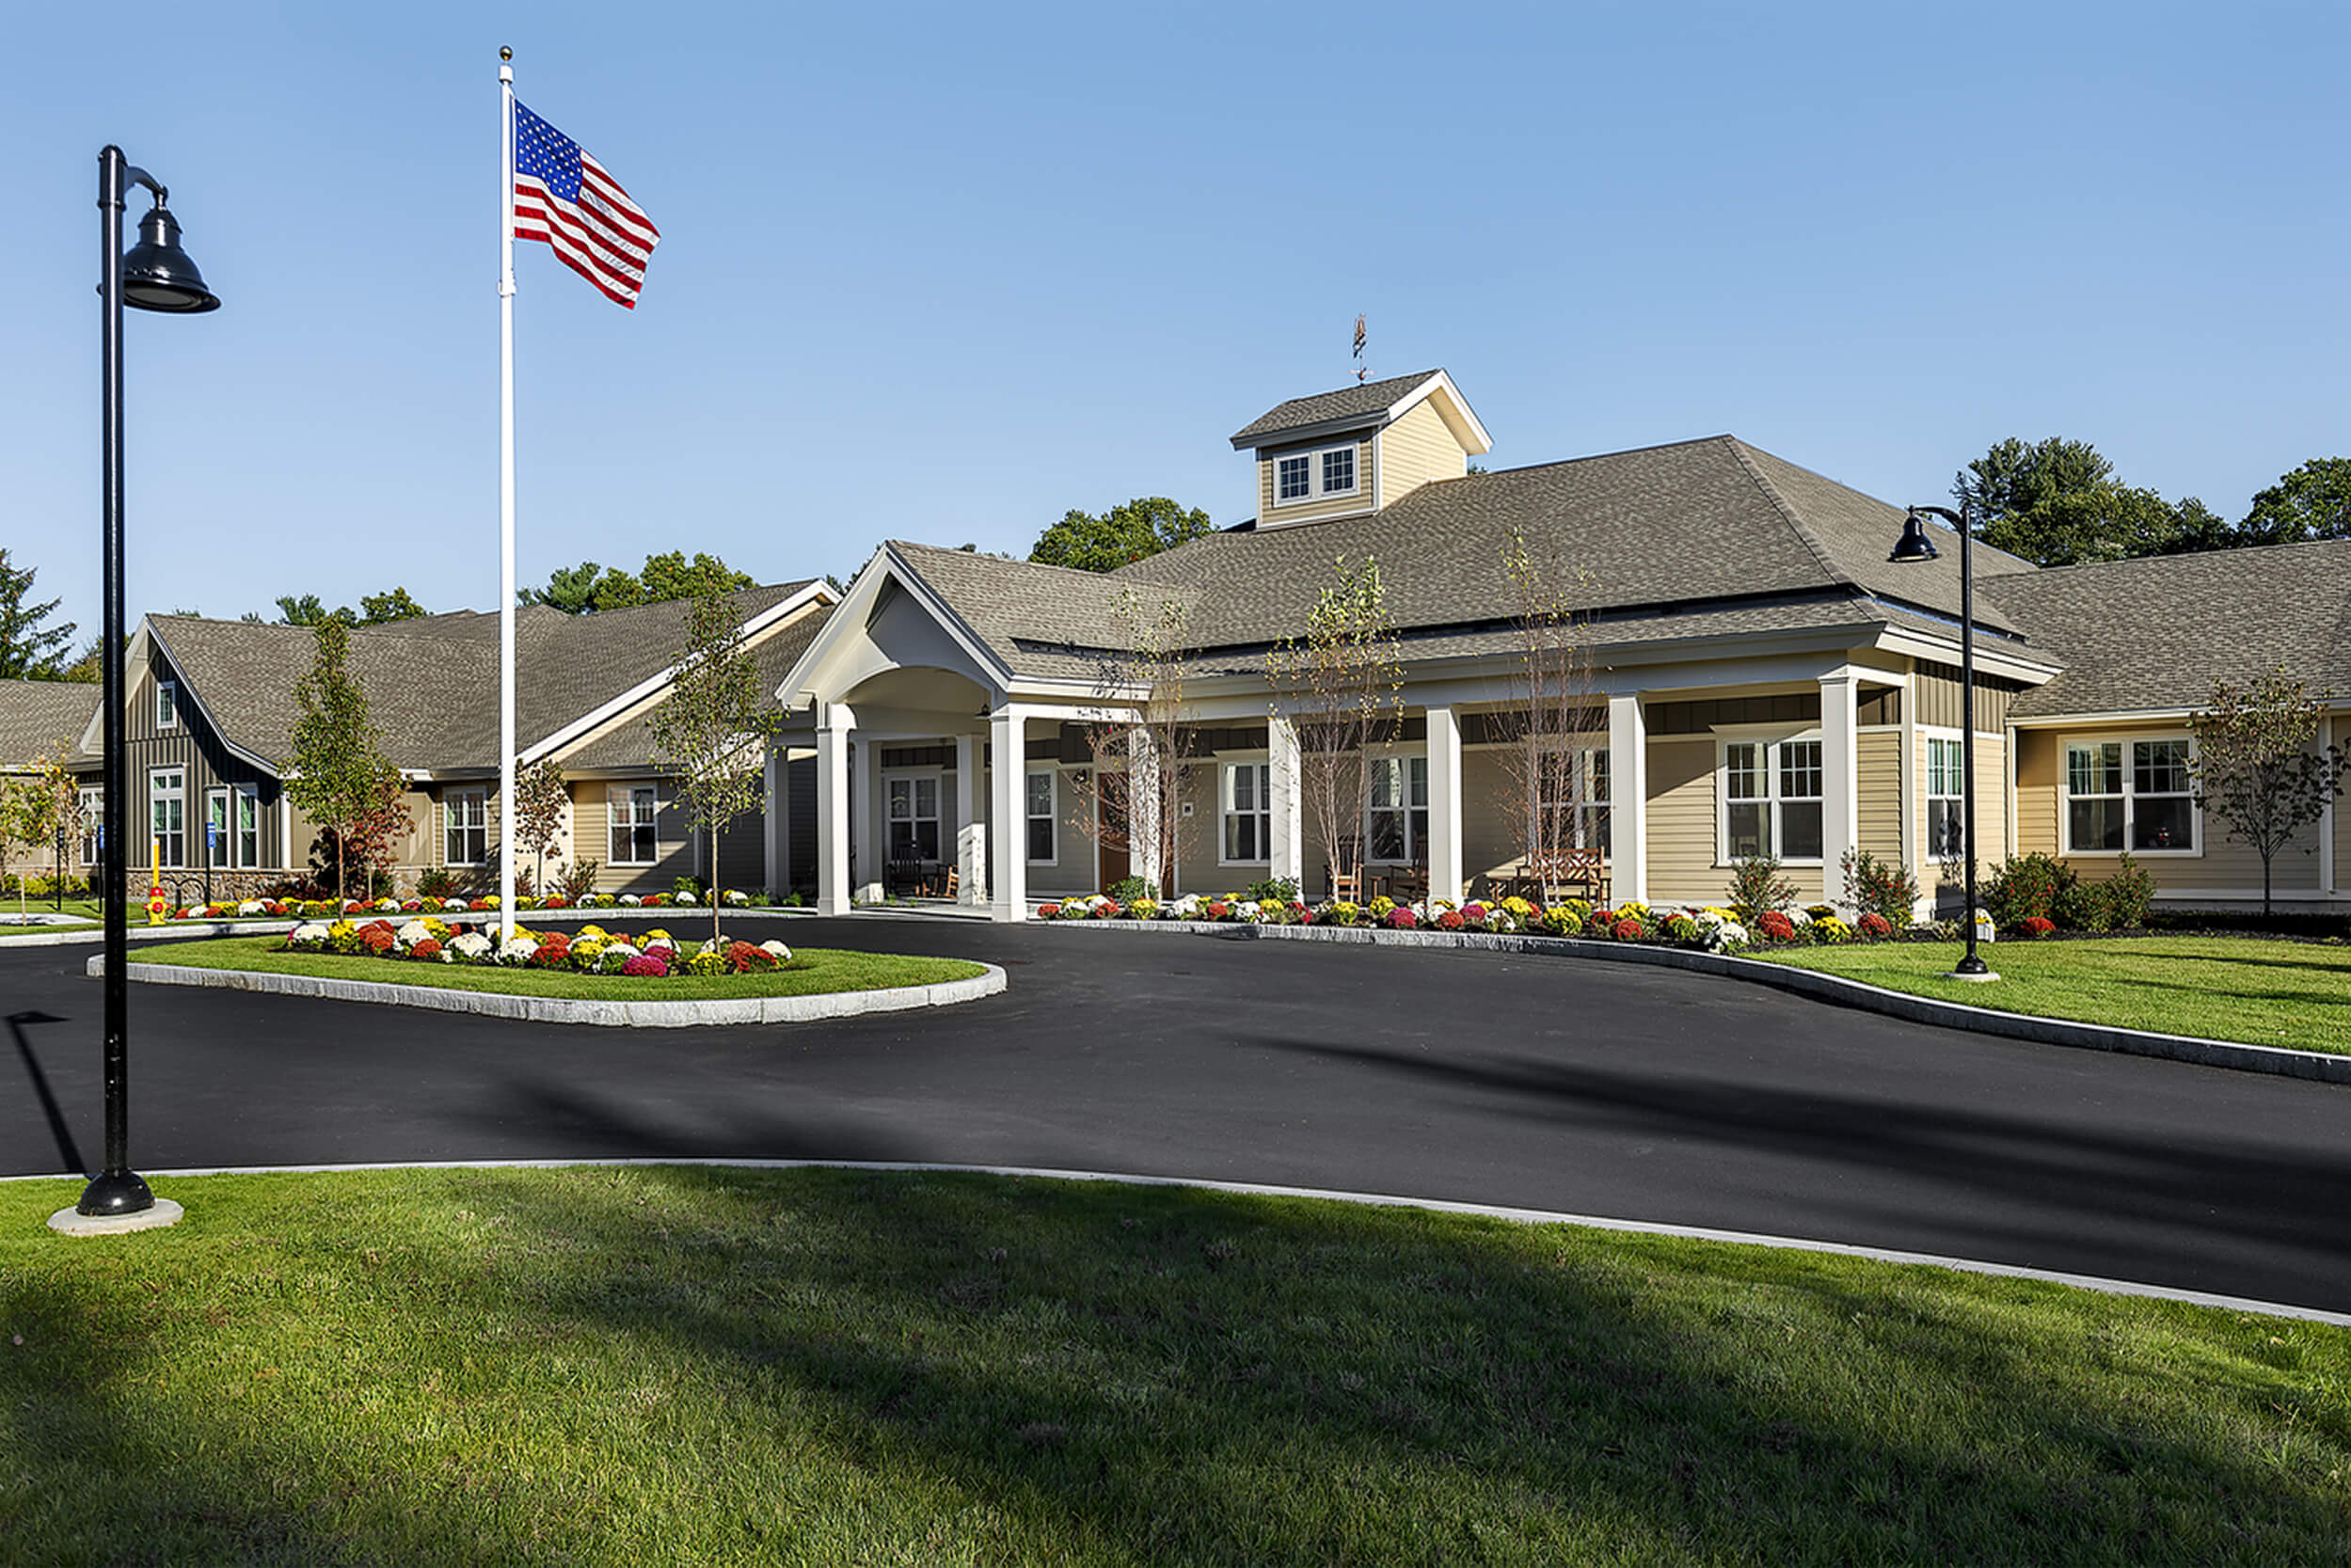 Exterior daytime view of the entry of an assisted living facility. The building is low and long, featuring neutral beige colored siding with white trim and a portico entry area. A drive-thru parking area is seen in front, with an American flag atop a flagpole in the middle grassy area.